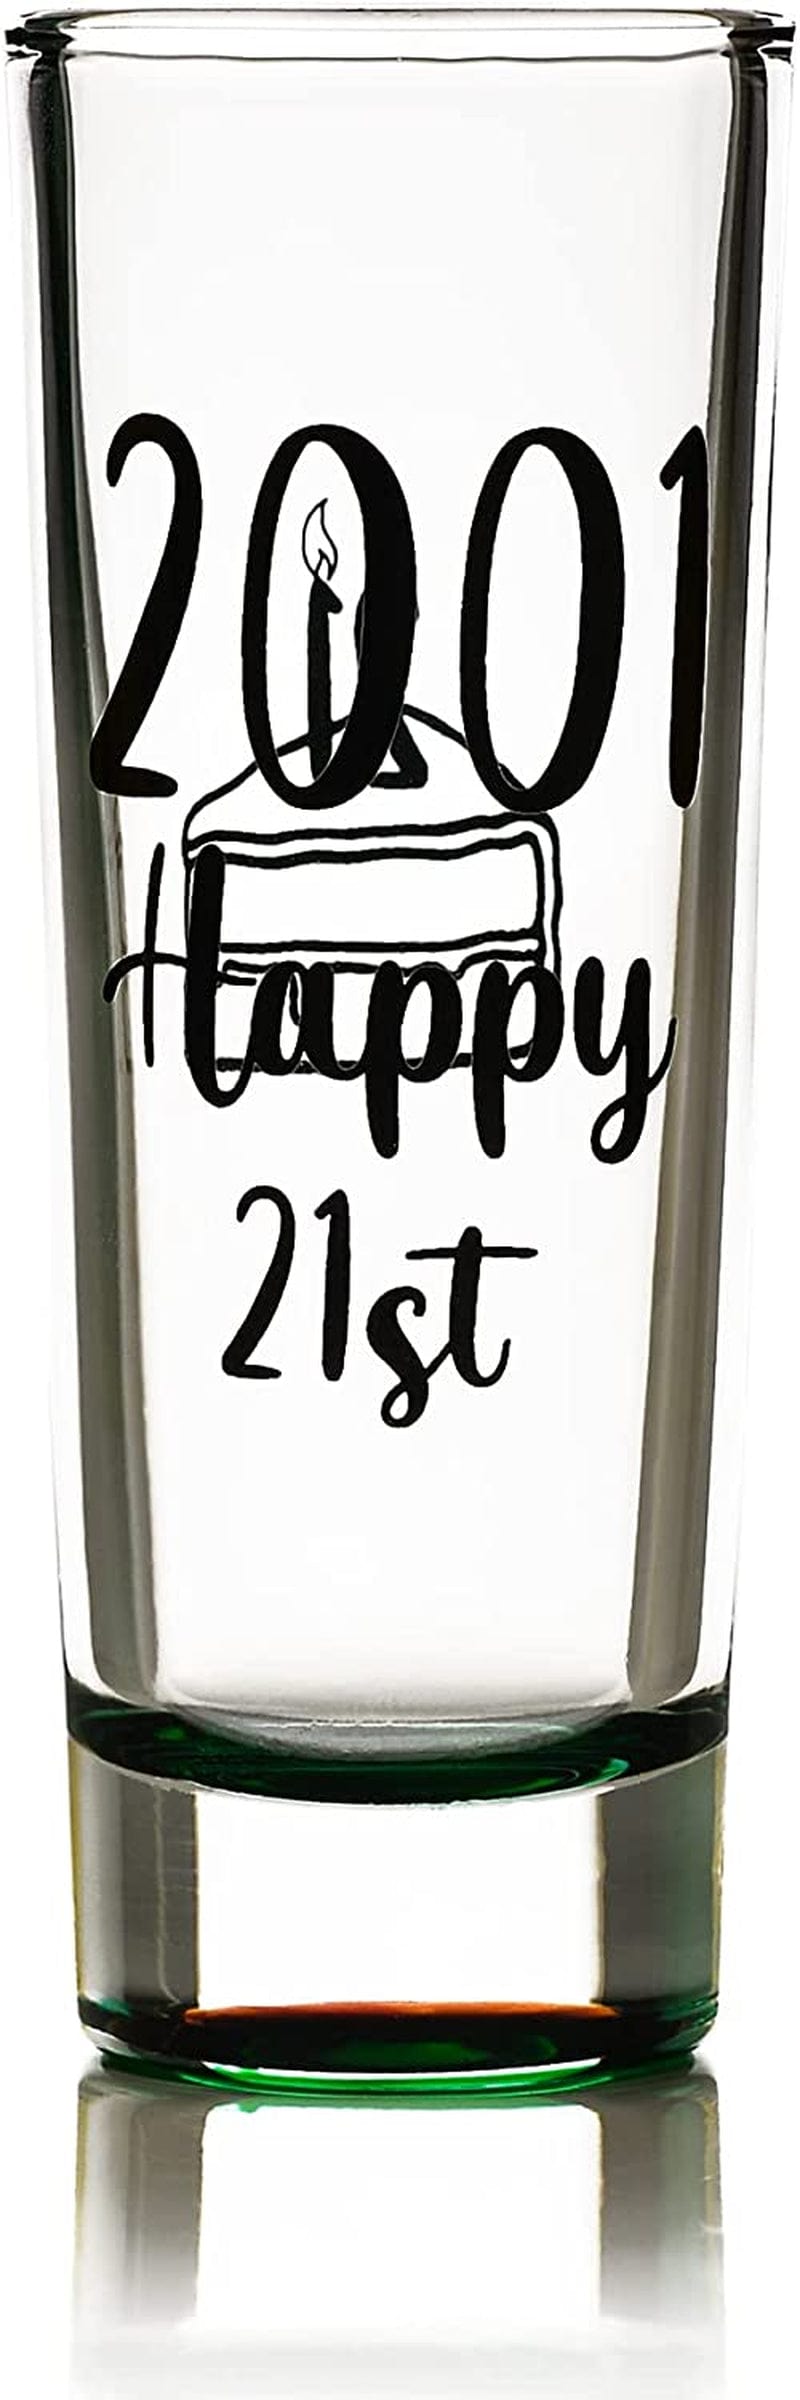 21St Birthday Shot Glass - 2001 Party Decorations for Him or Her - 2 Oz with Colored Base - Finally 21 Legal